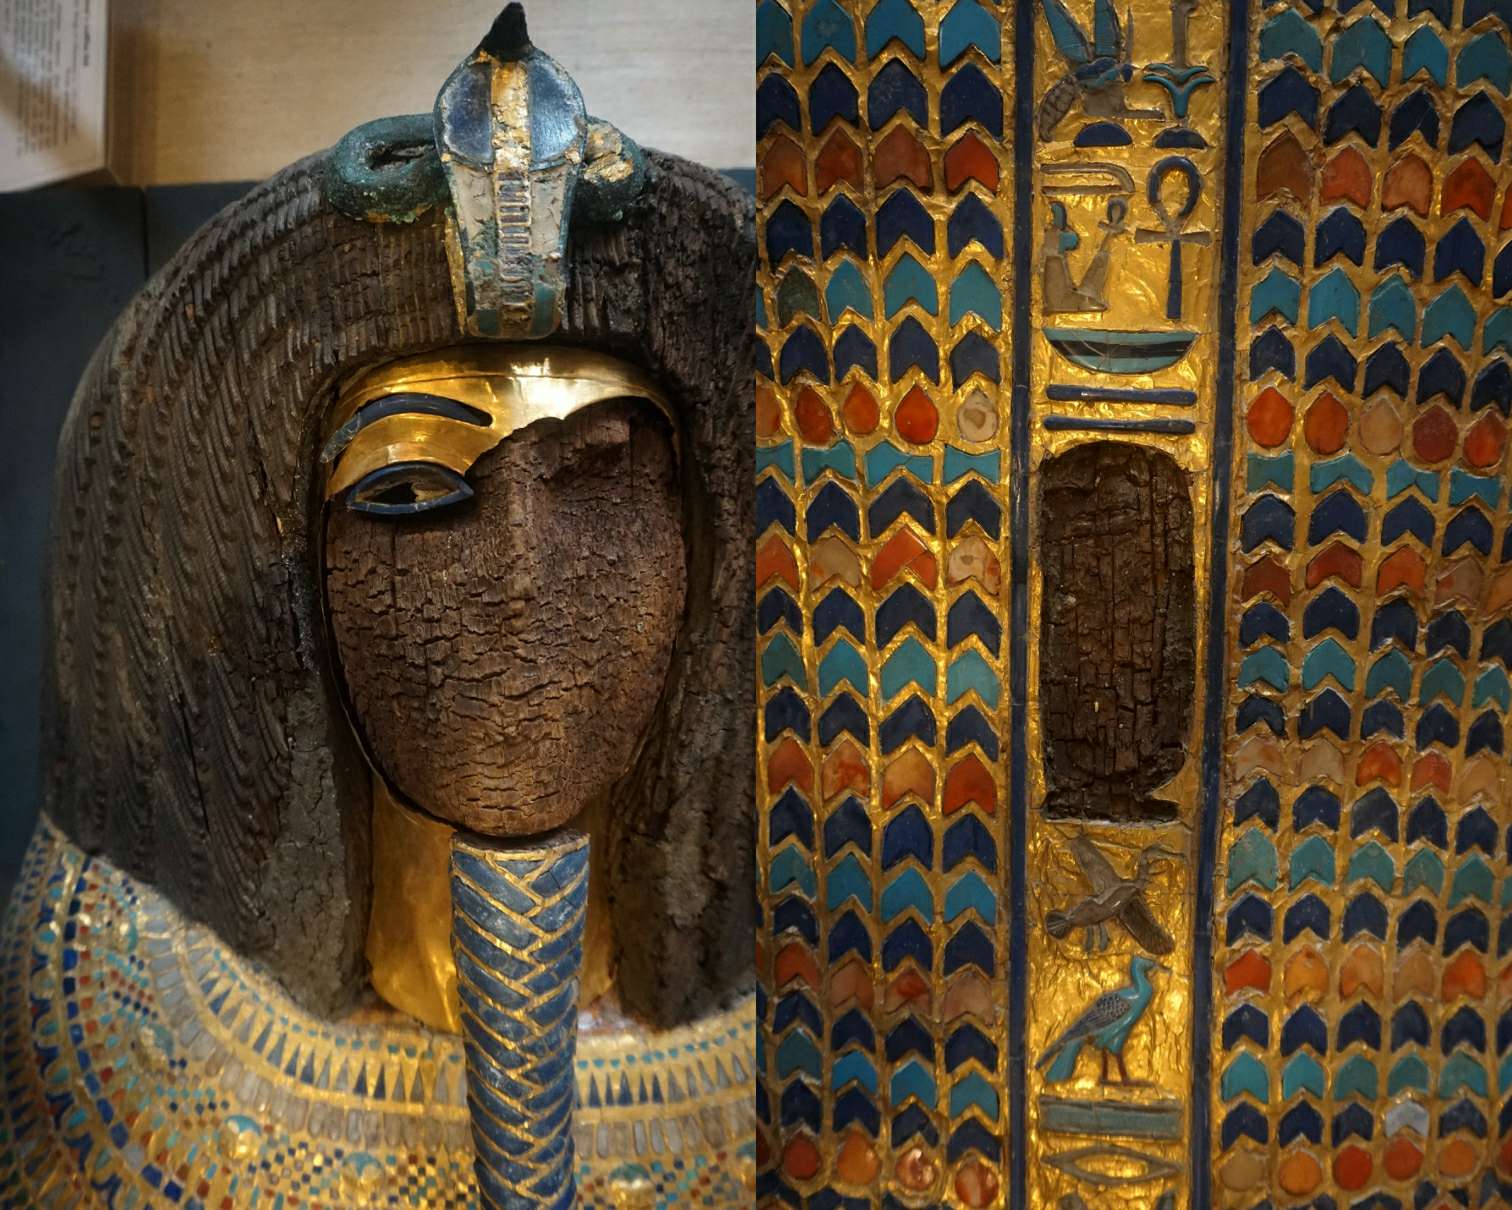 The KV55 coffin: The ripped off face mask (left), hieroglyphic band with erased cartouche (right)